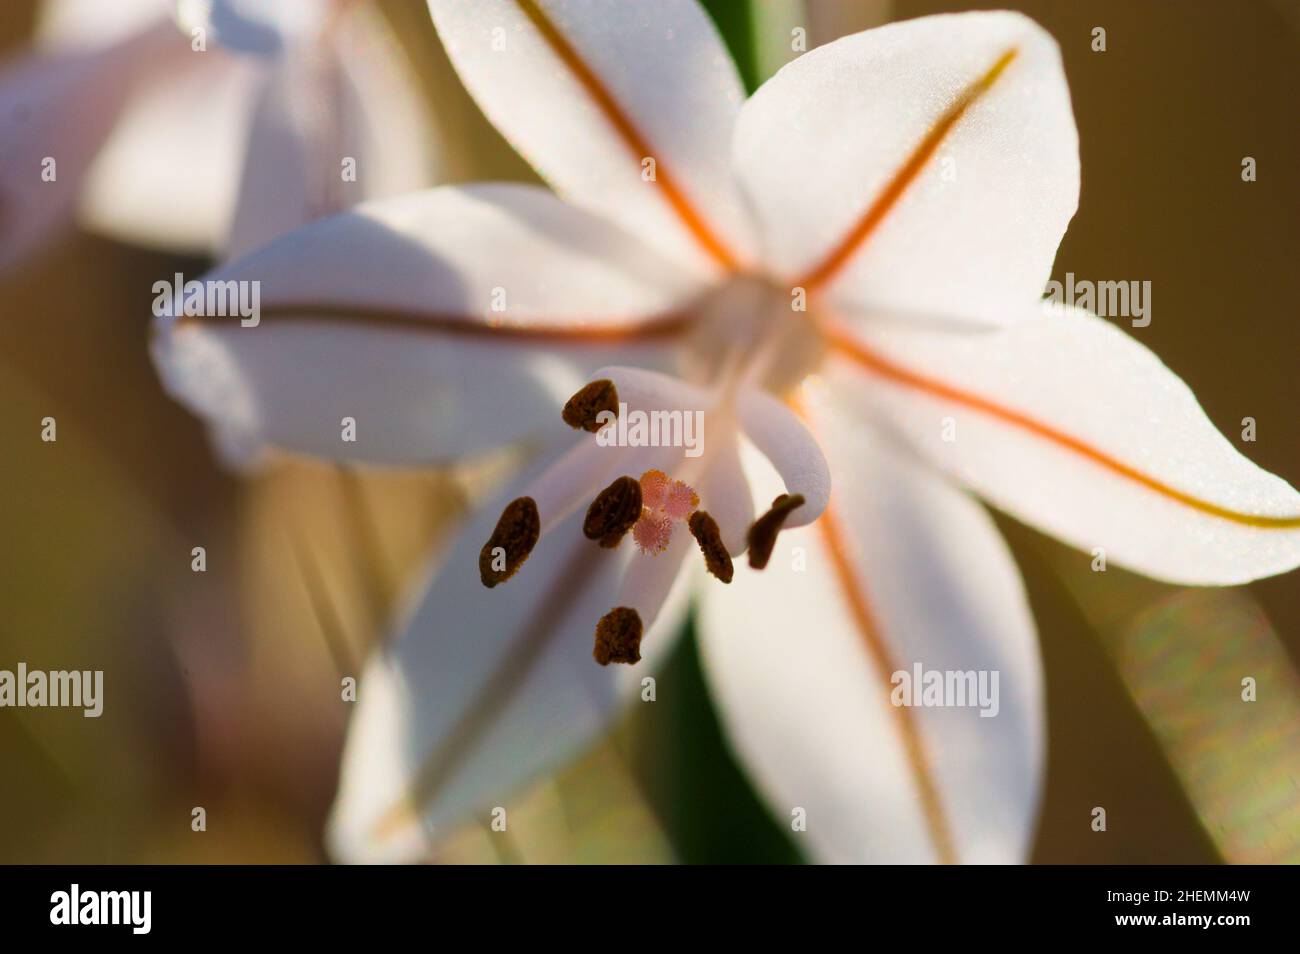 Detail of the flower of Asphodelus fistulosus, hollow-stemmed asphodel or onionweed lit from behind by sunlight Stock Photo